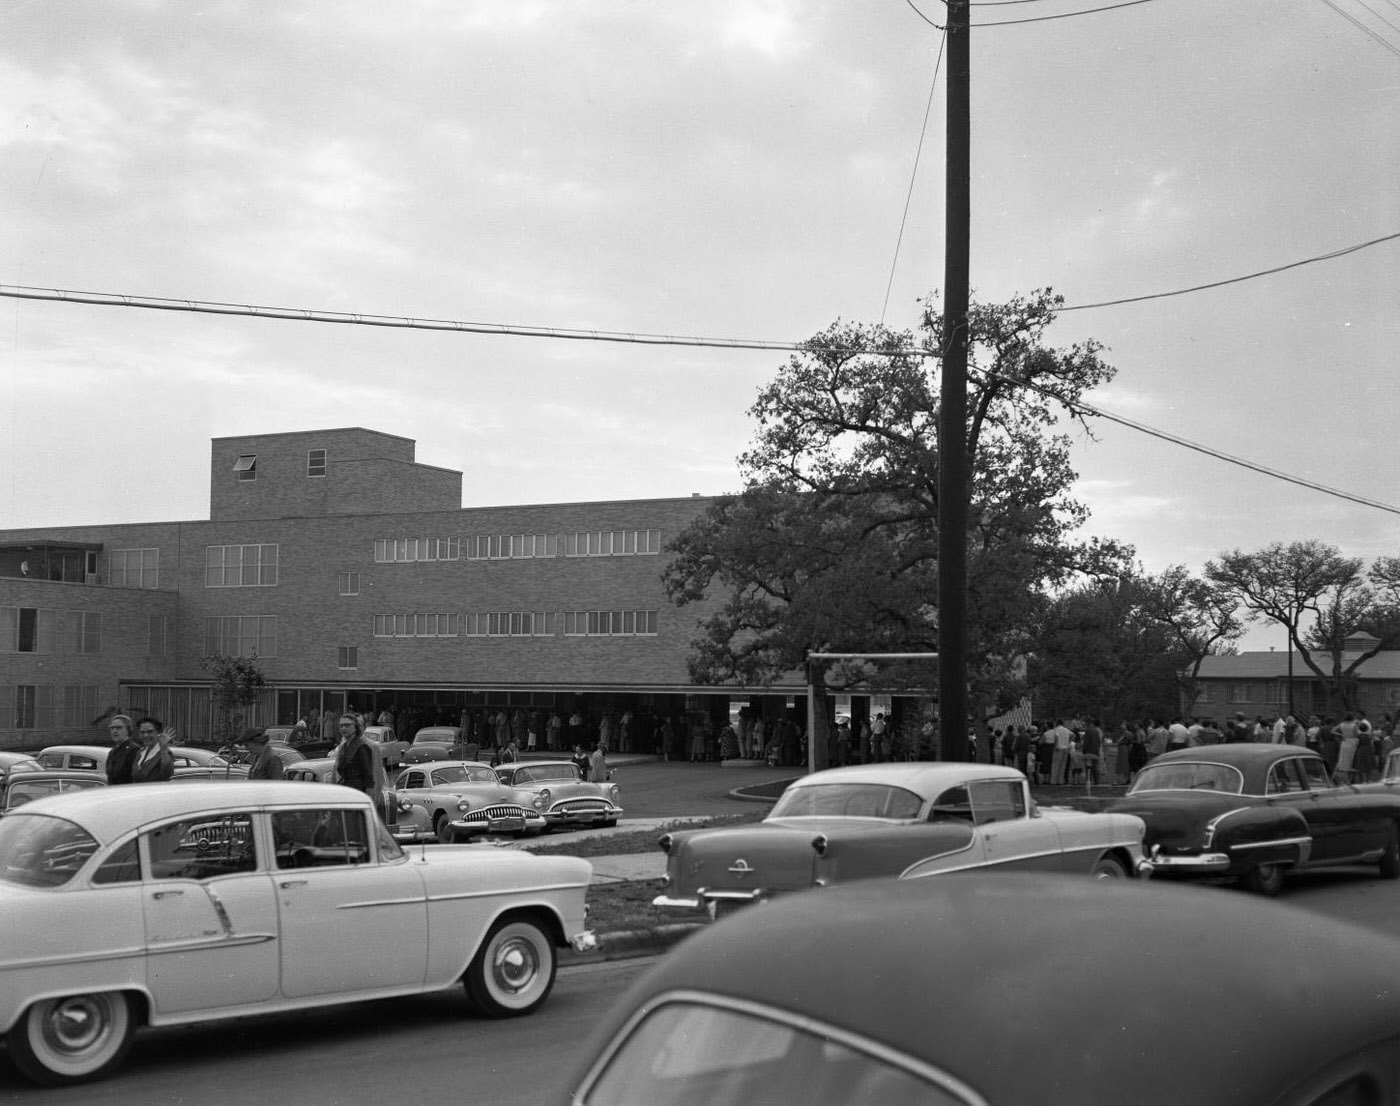 St. David's Hospital Opening Day Packed with Cars and People, 1955.